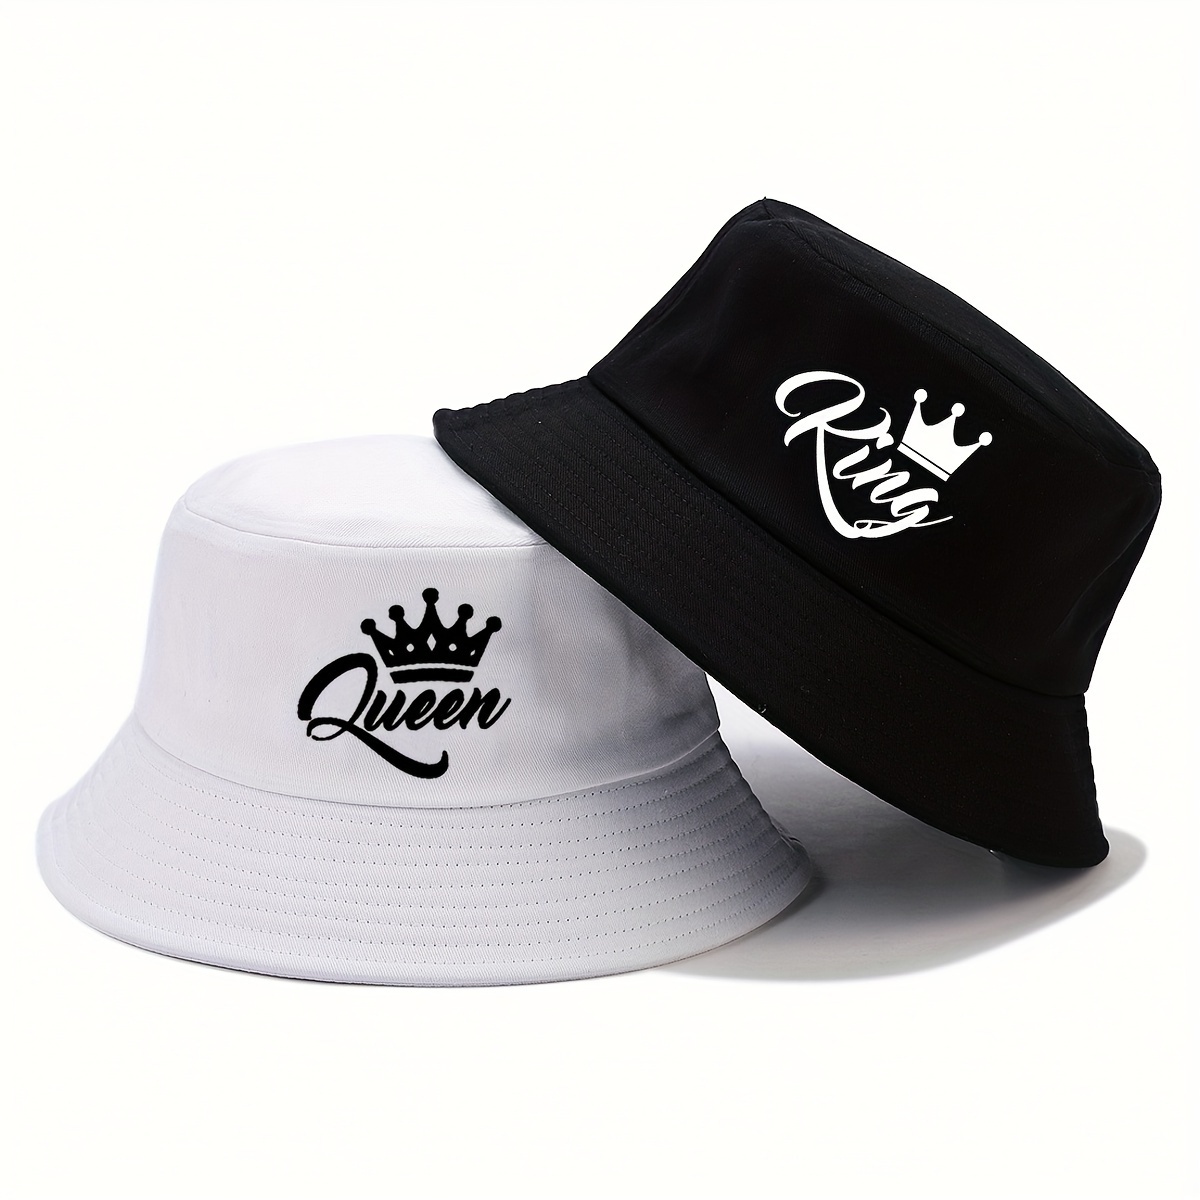 

1pc 'king' & 'queen' Crown Design Bucket Hat, Unisex Breathable Sun Protection Hat, Outdoor Travel Foldable Fisherman Cap For Couples